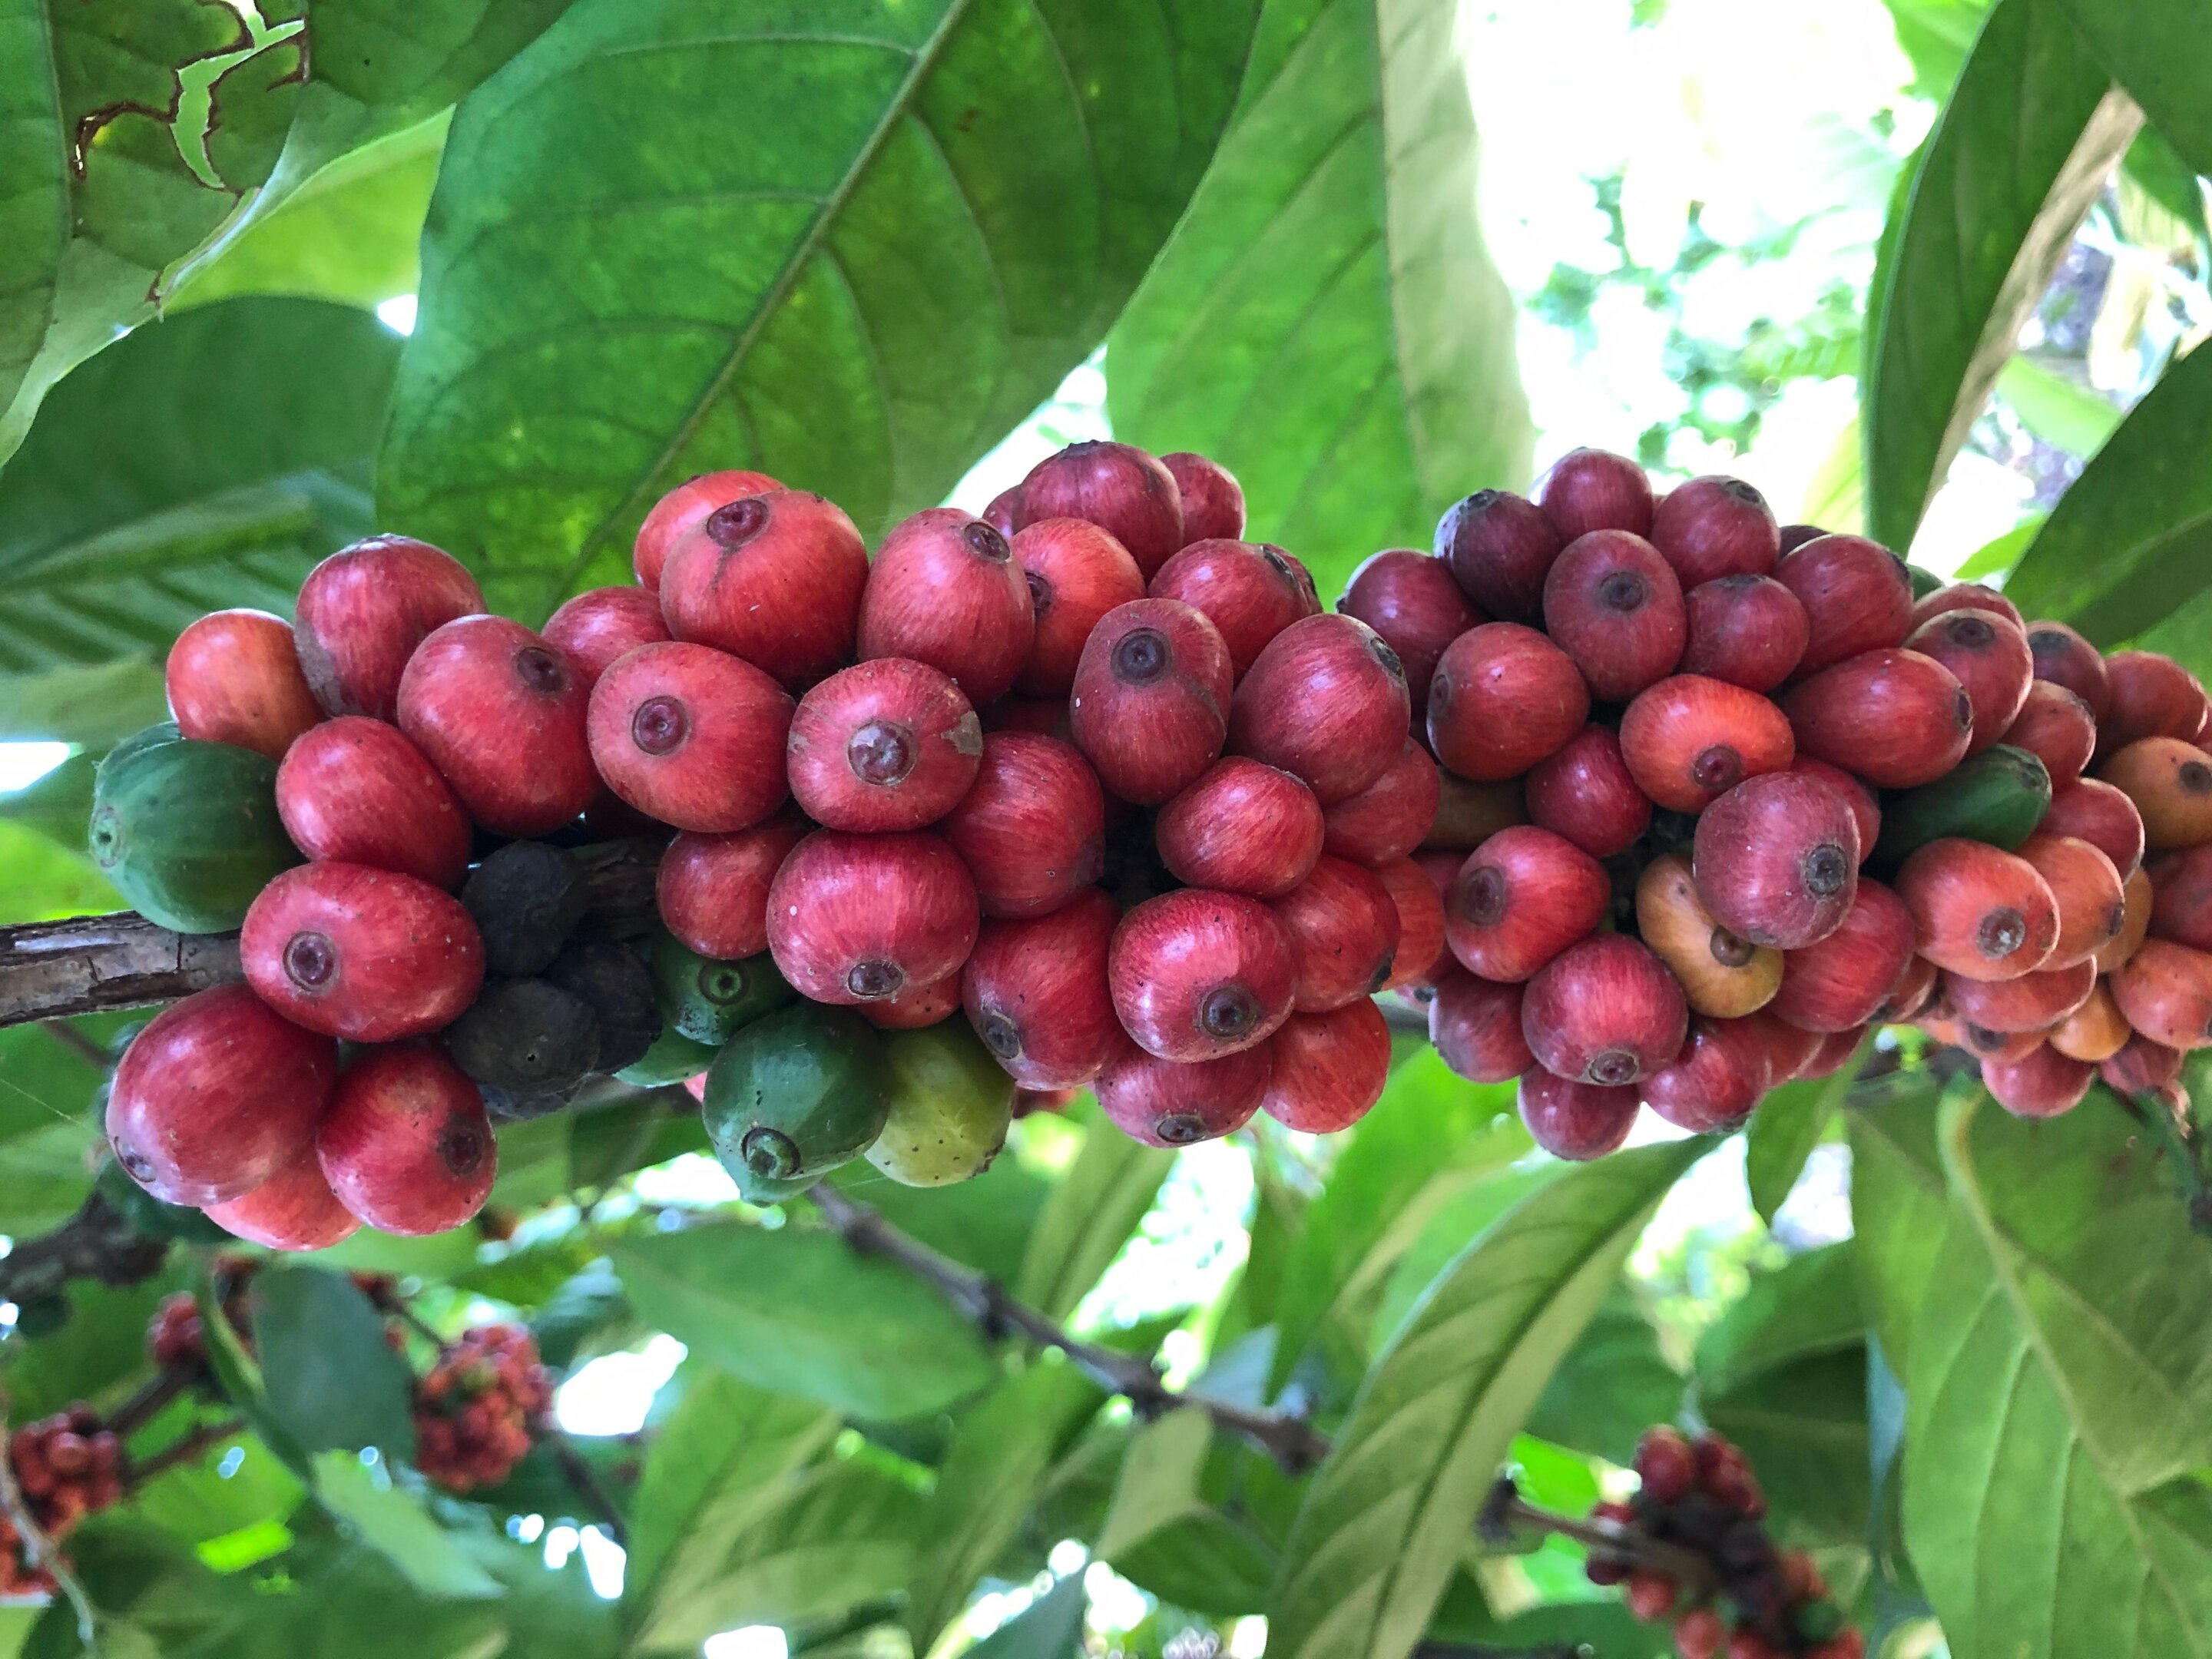 images of coffee plant